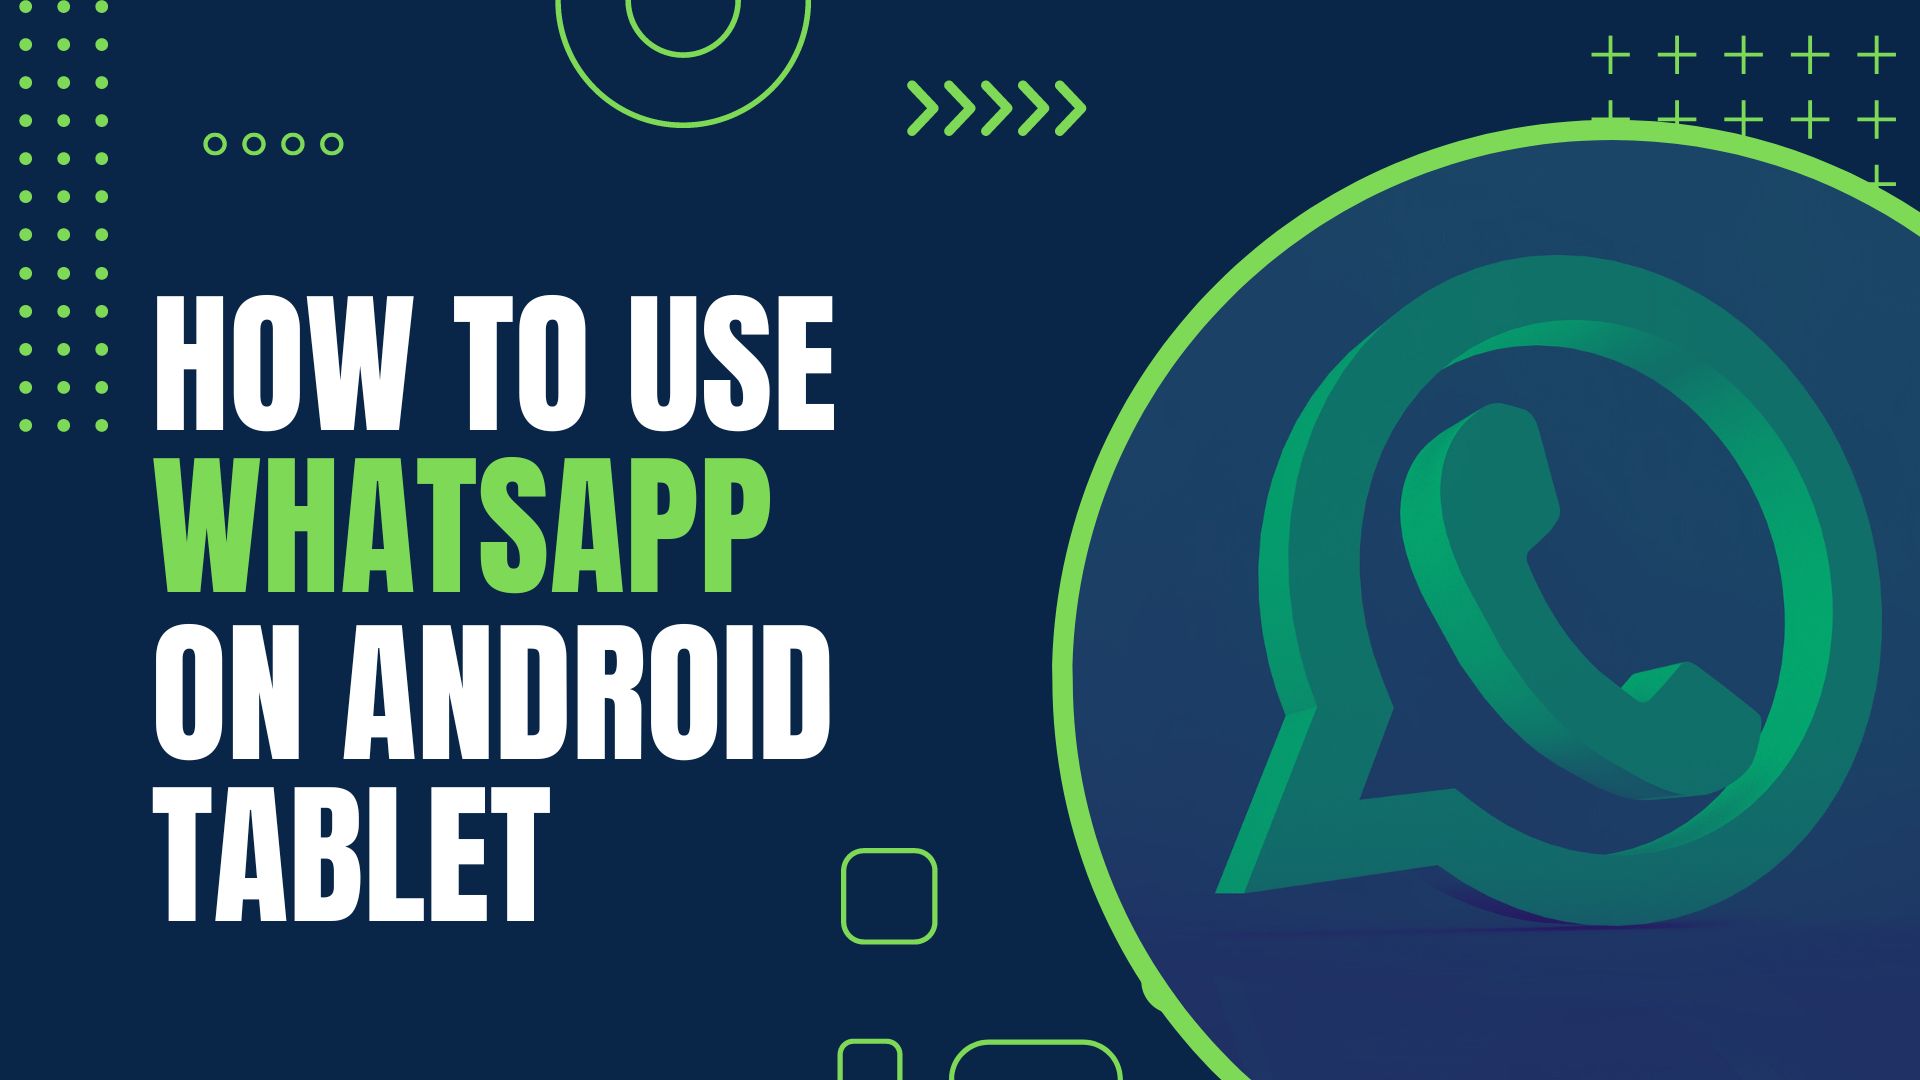 How to use WhatsApp on Android tablet